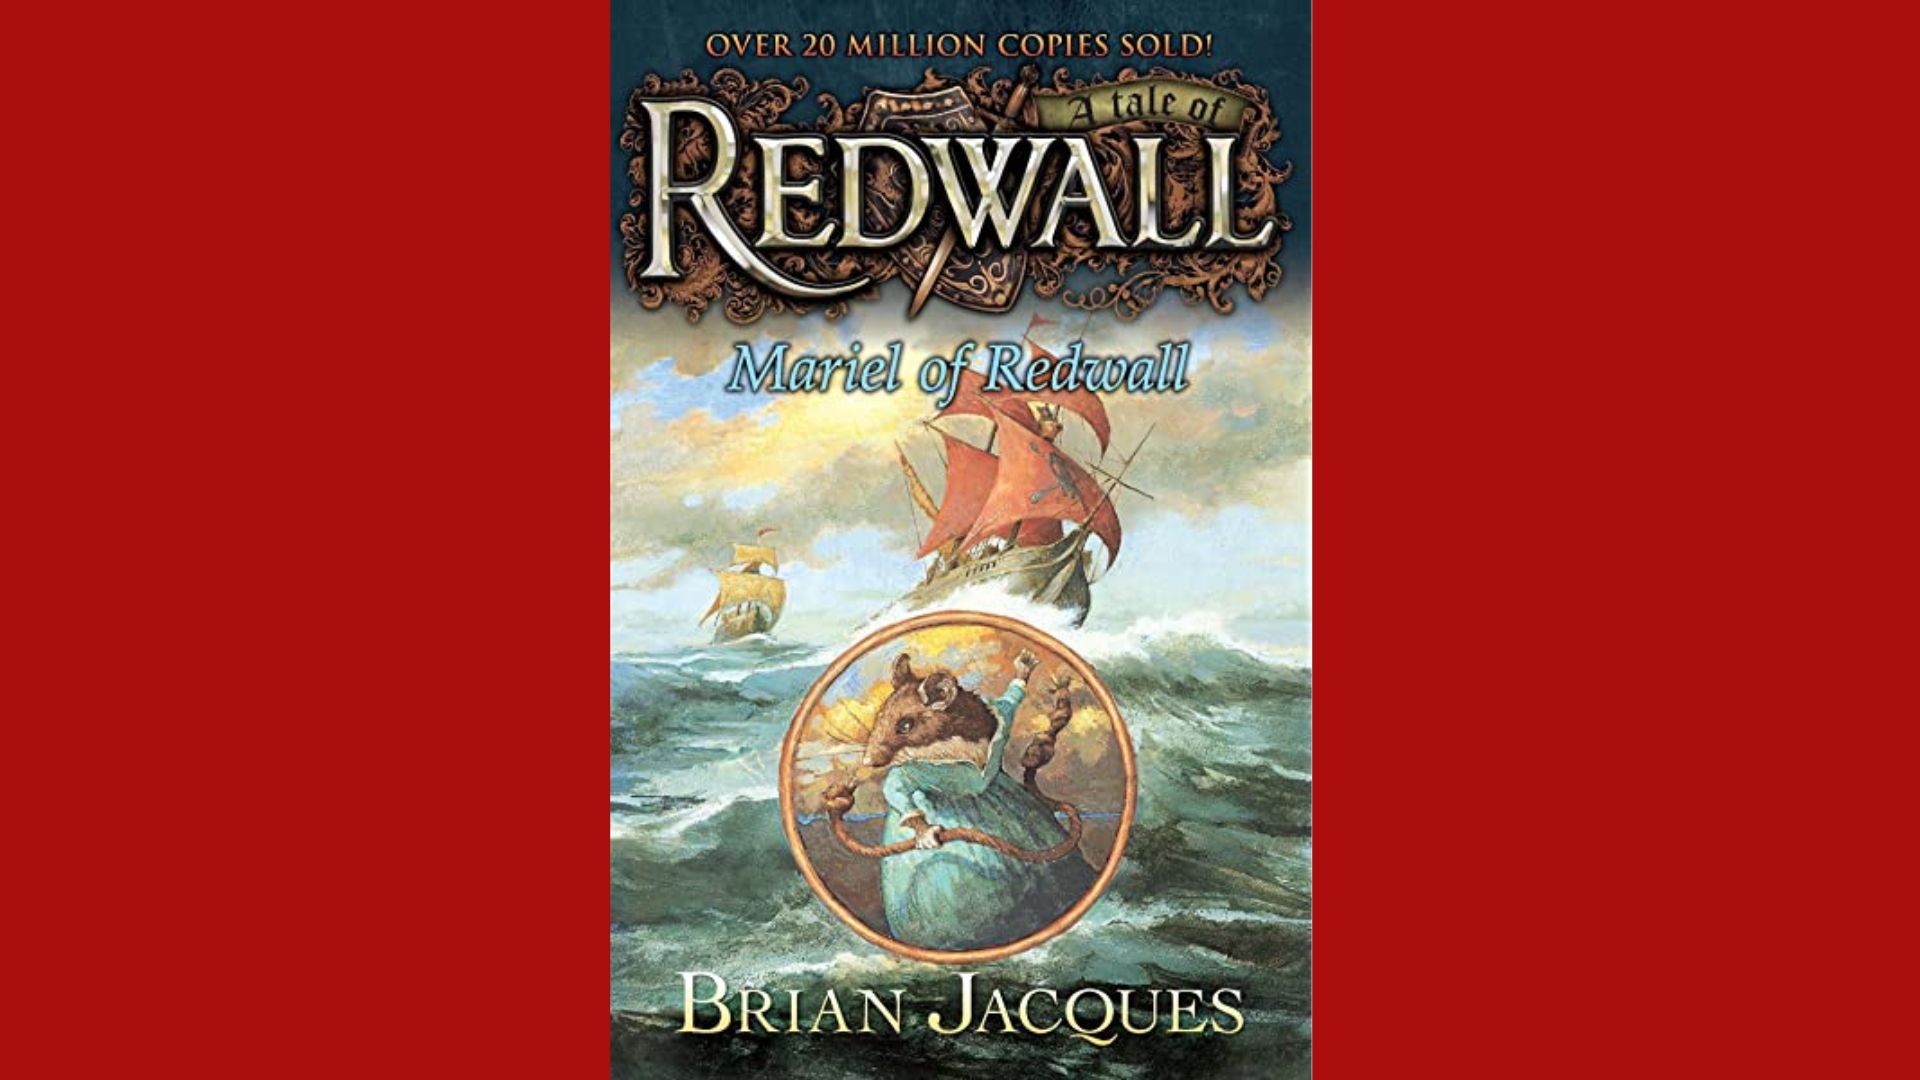 REDWALL BY BRIAN JACQUES audiobook